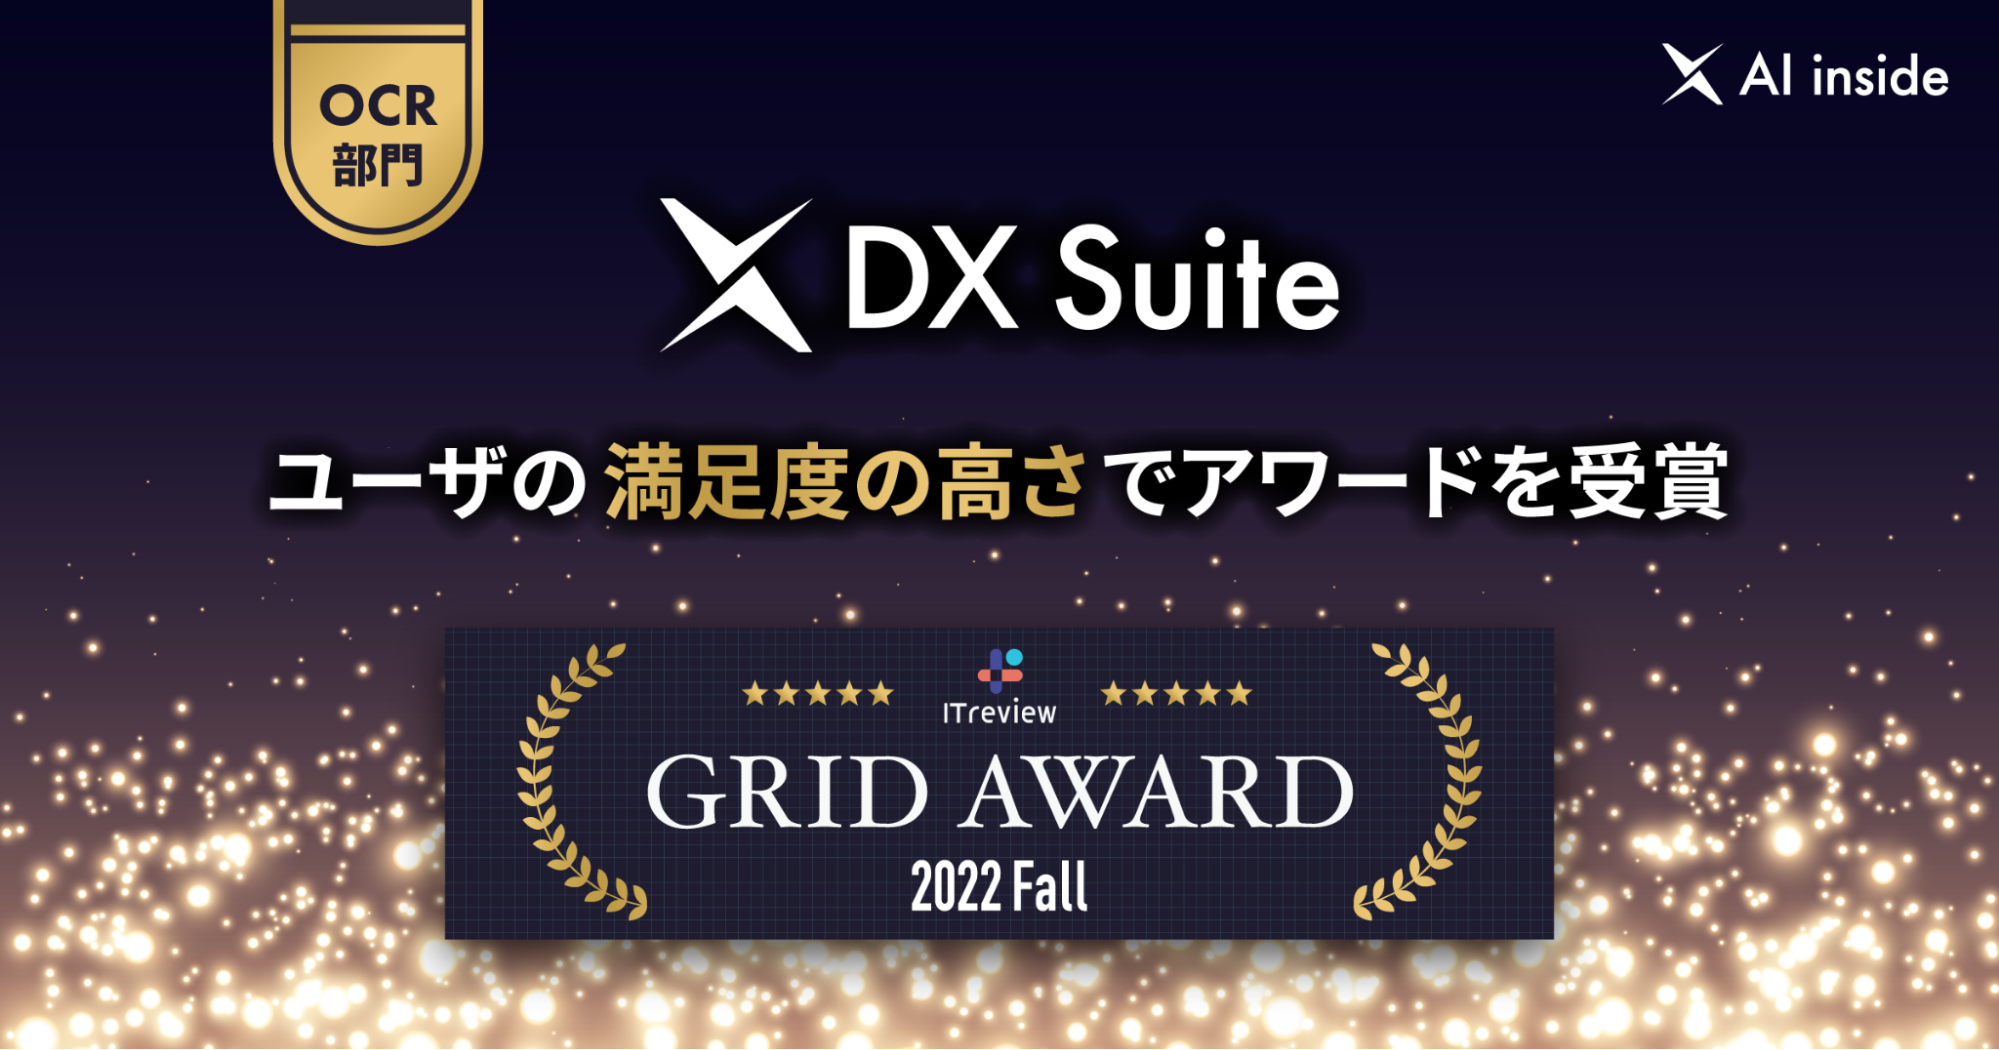 AI inside の「DX Suite」がITreview Grid Award 2022 Fall（OCR カテゴリー）にて「High Performer」を受賞！